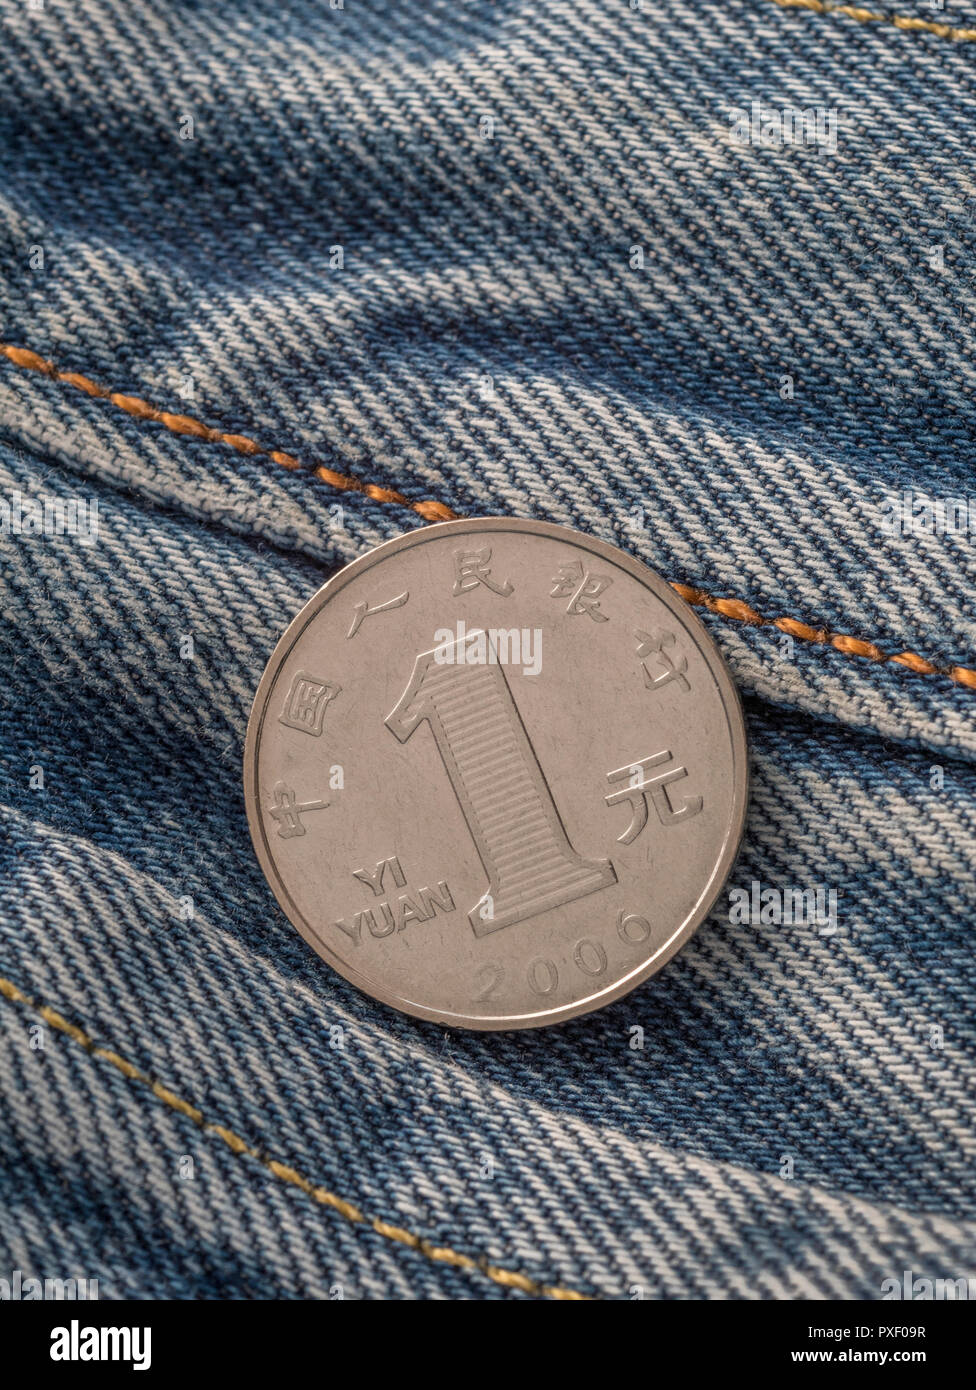 Chinese Yuan / Renminbi coin with pocket - metaphor for personal earnings, Chinese wages, wage levels, China garment industry. Stock Photo